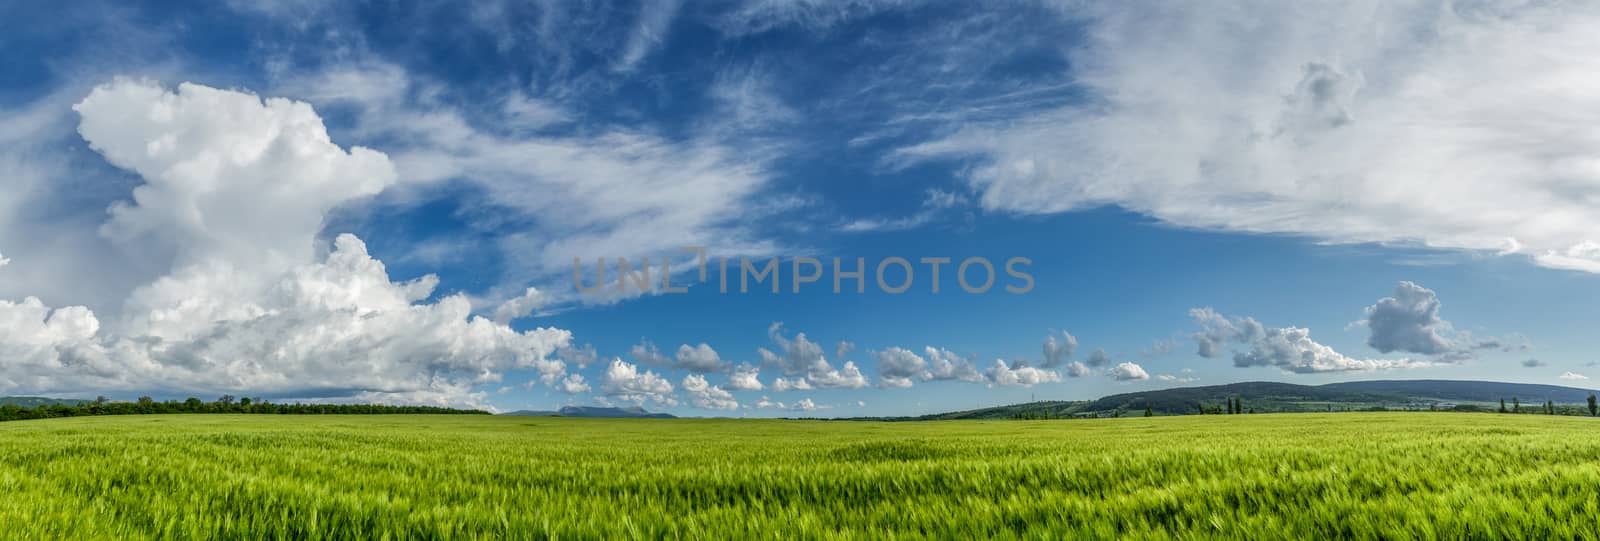 Wheat field on a background of cloudy sky.